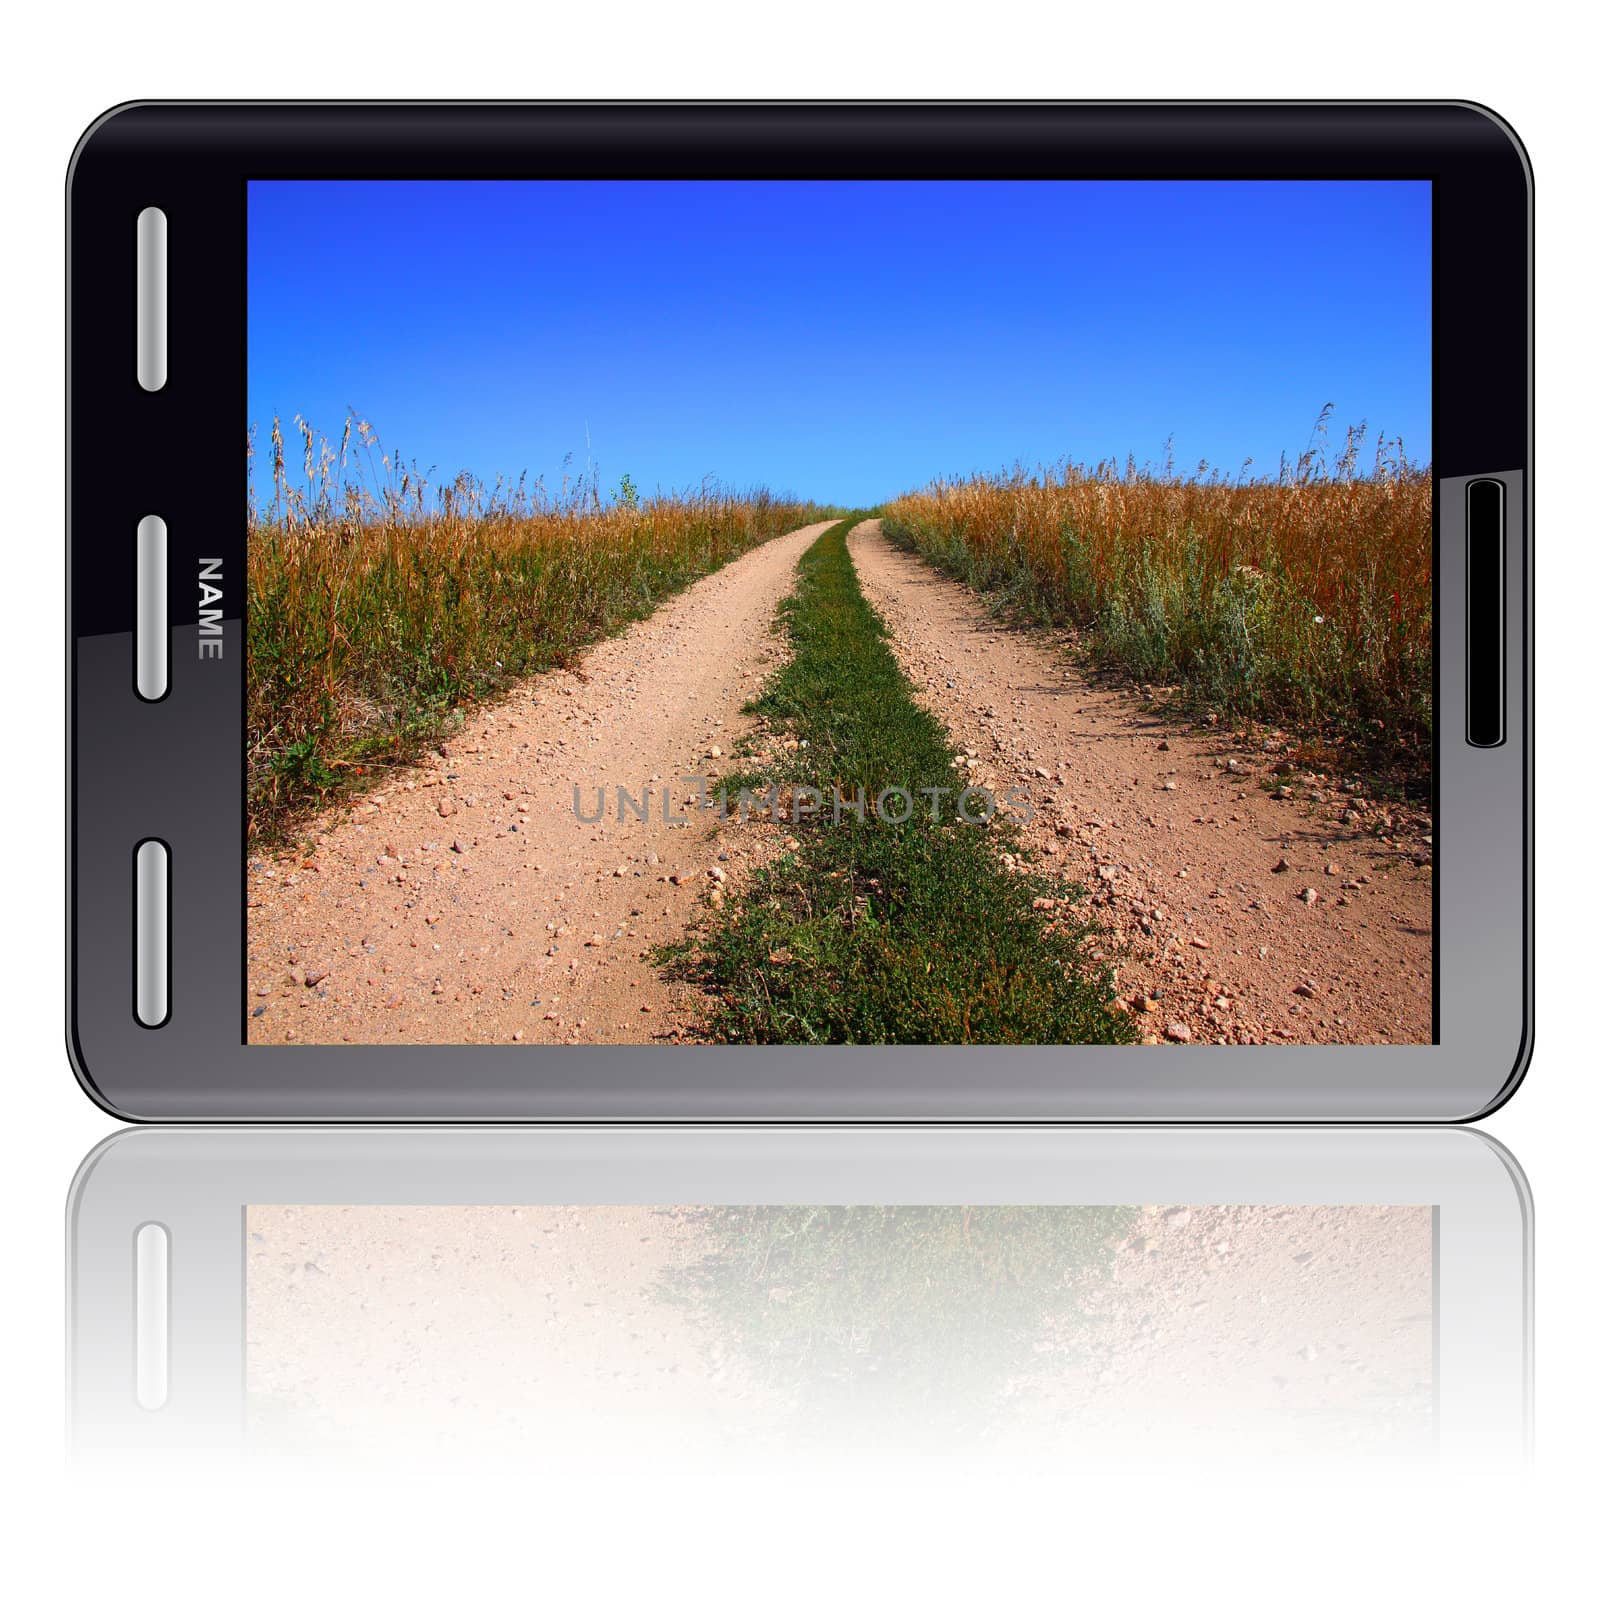 Vertical Tablet computer isolated on the white background. Screen saver road.